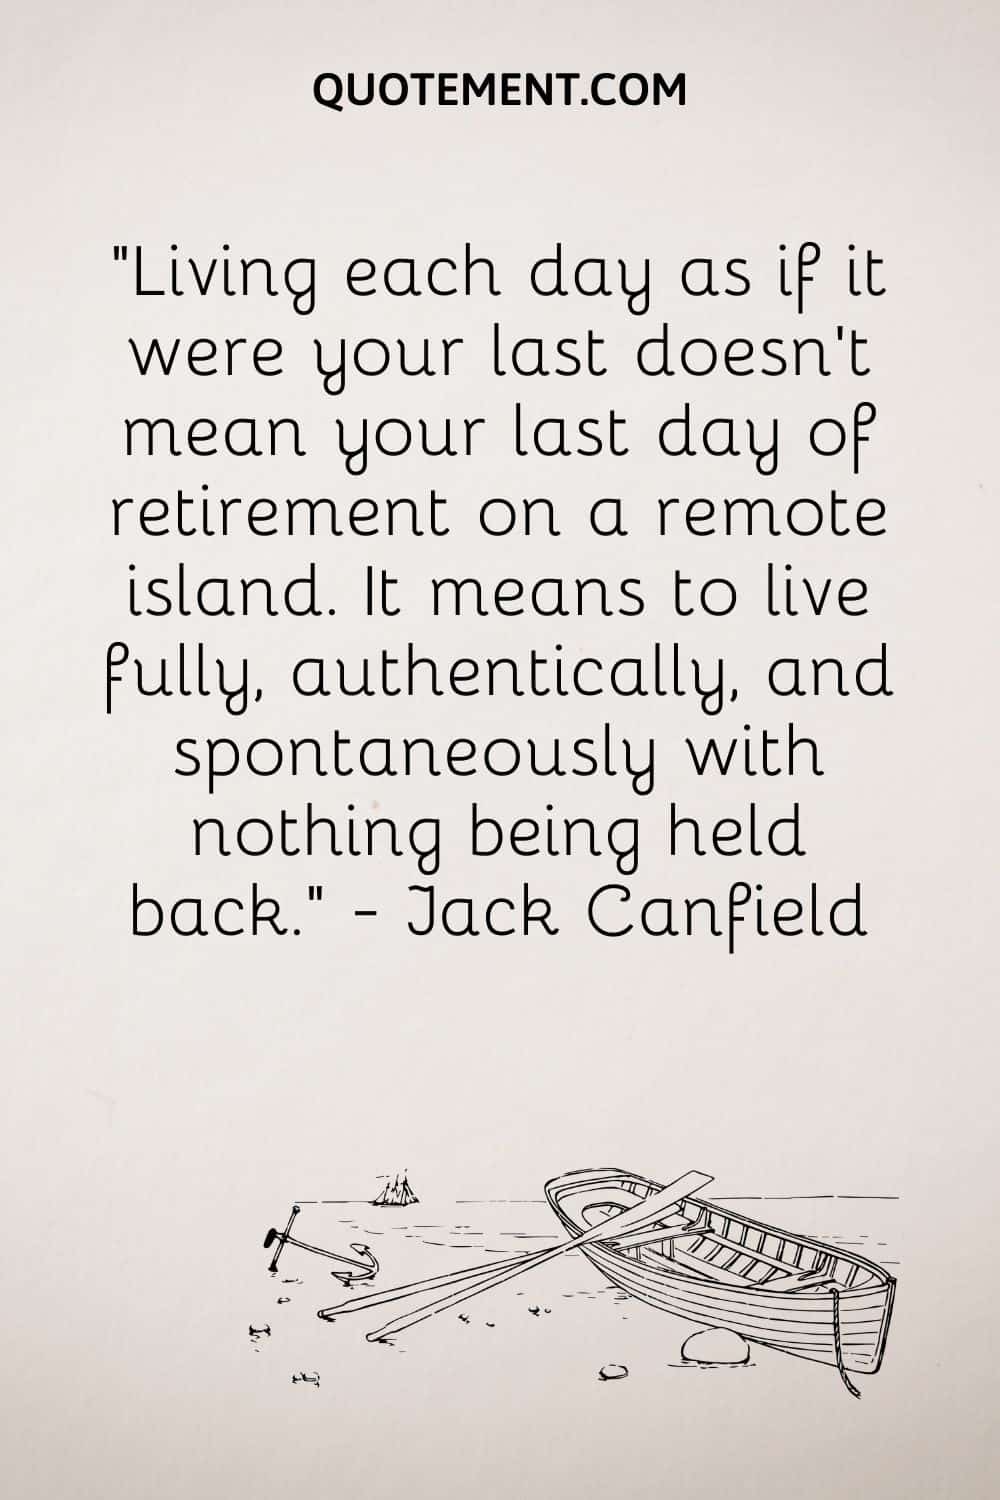 “Living each day as if it were your last doesn't mean your last day of retirement on a remote island. It means to live fully, authentically, and spontaneously with nothing being held back.” — Jack Canfield